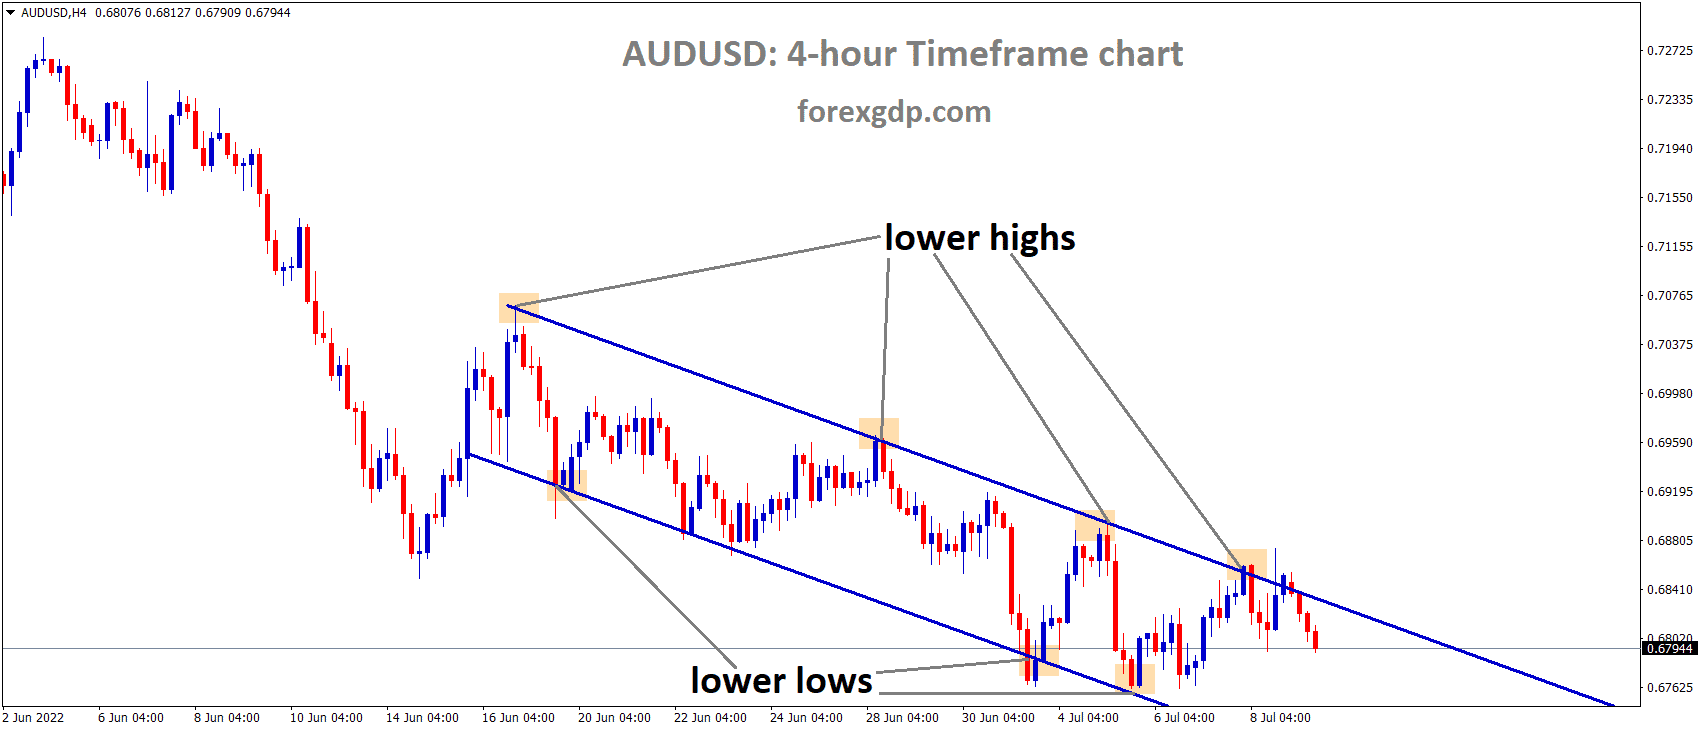 AUDUSD is moving in the Descending channel and the Market has fallen from the Lower high area of the channel